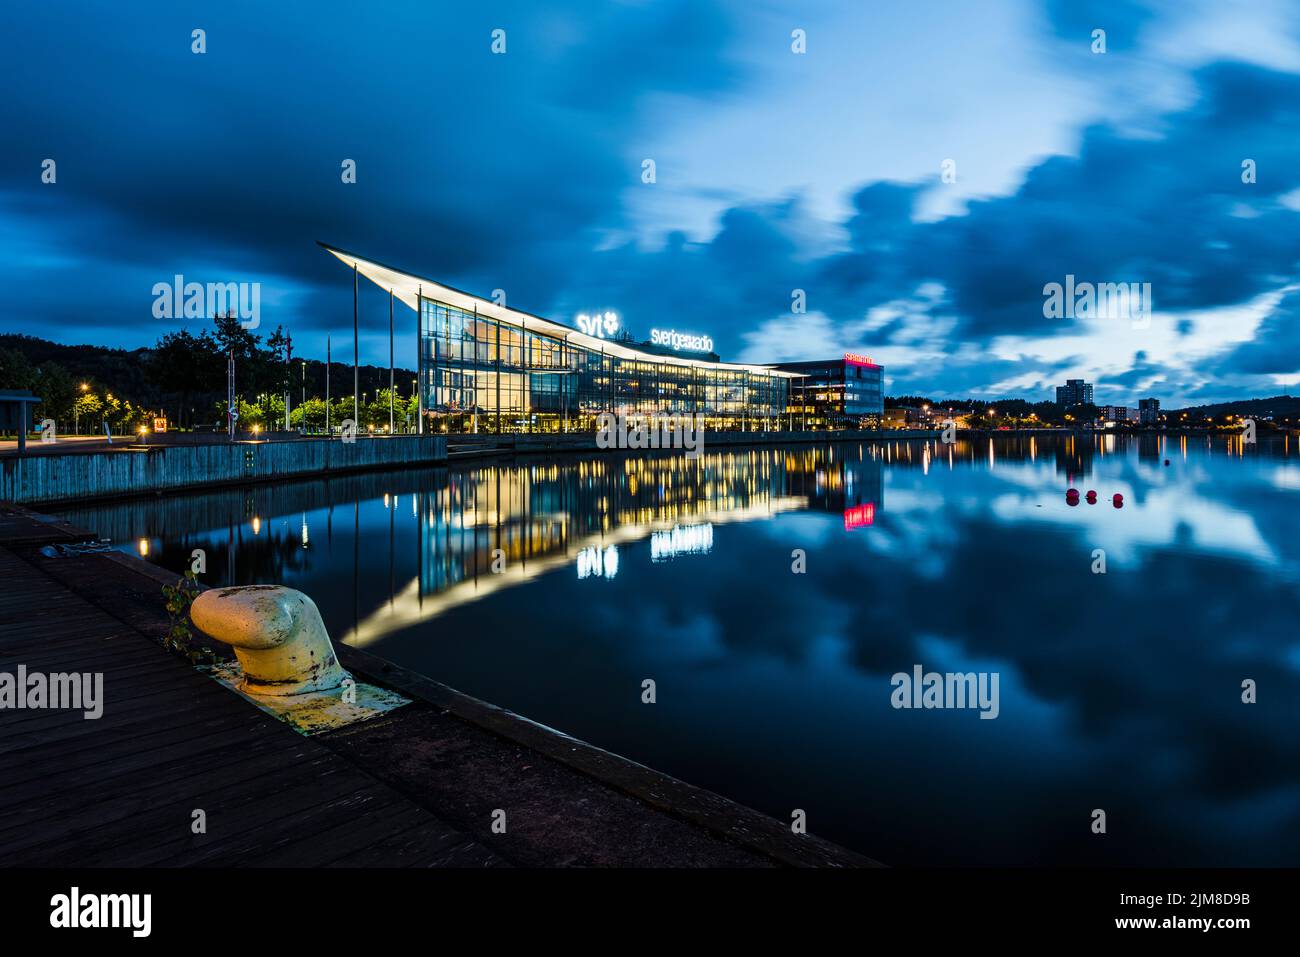 Reflection of building in river Stock Photo